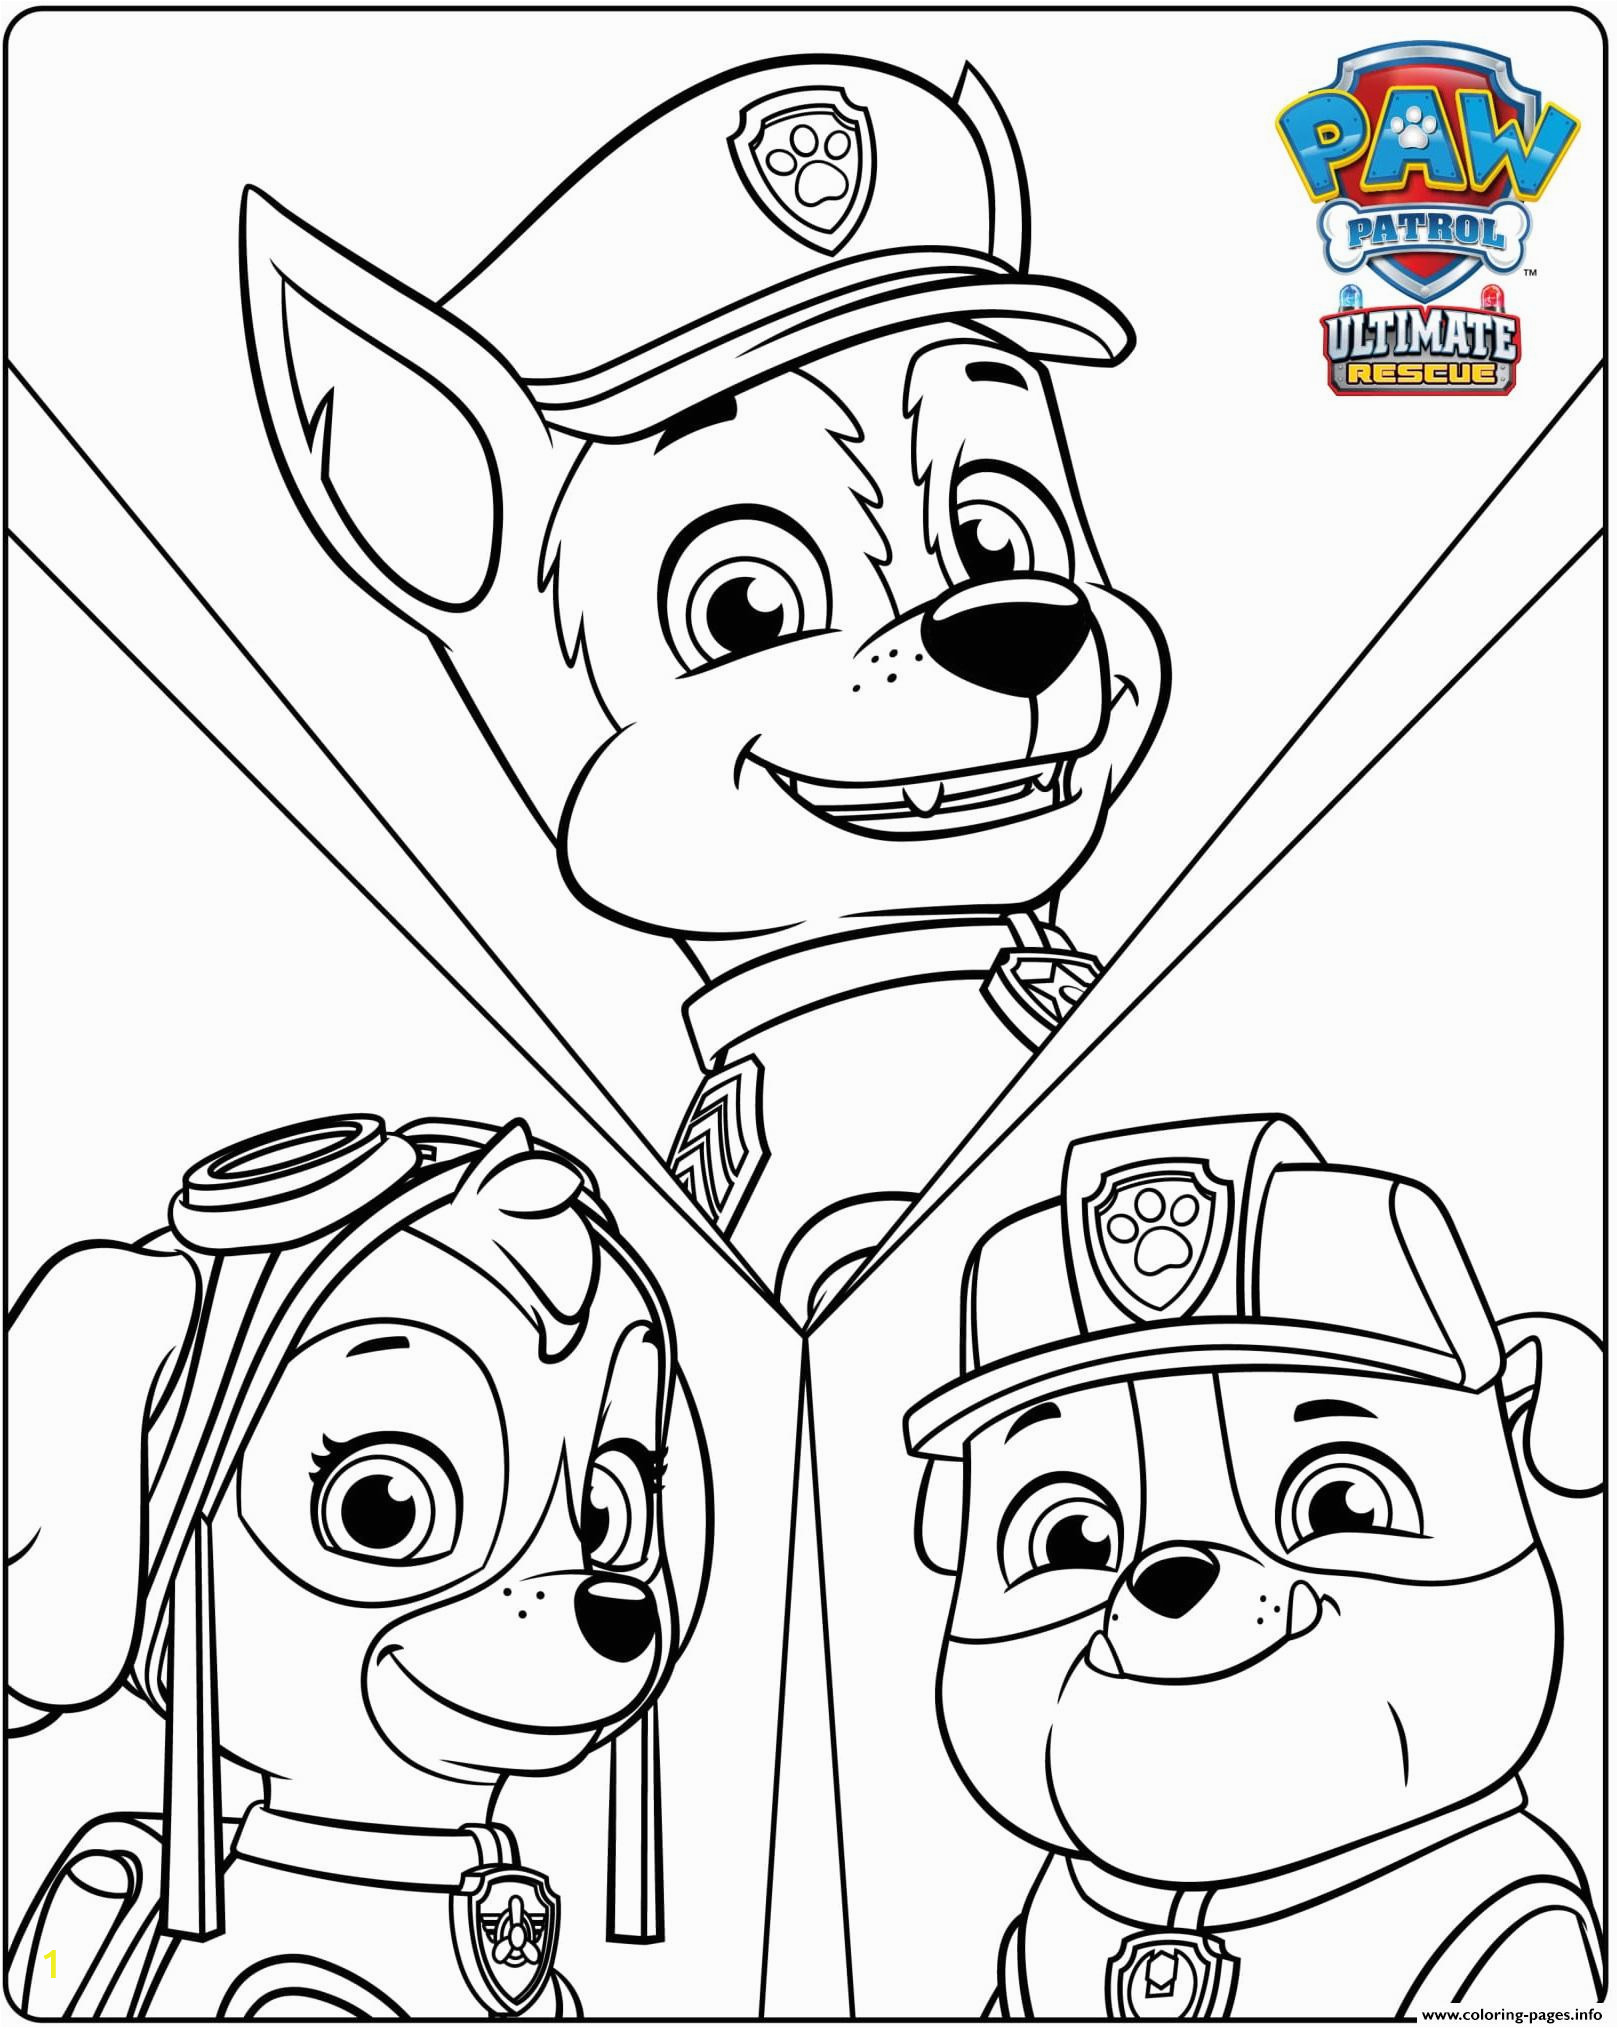 Paw Patrol Ultimate Rescue Coloring Pages Bathroom Chase Coloring Page Paw Patrol Paw Patrol Mighty